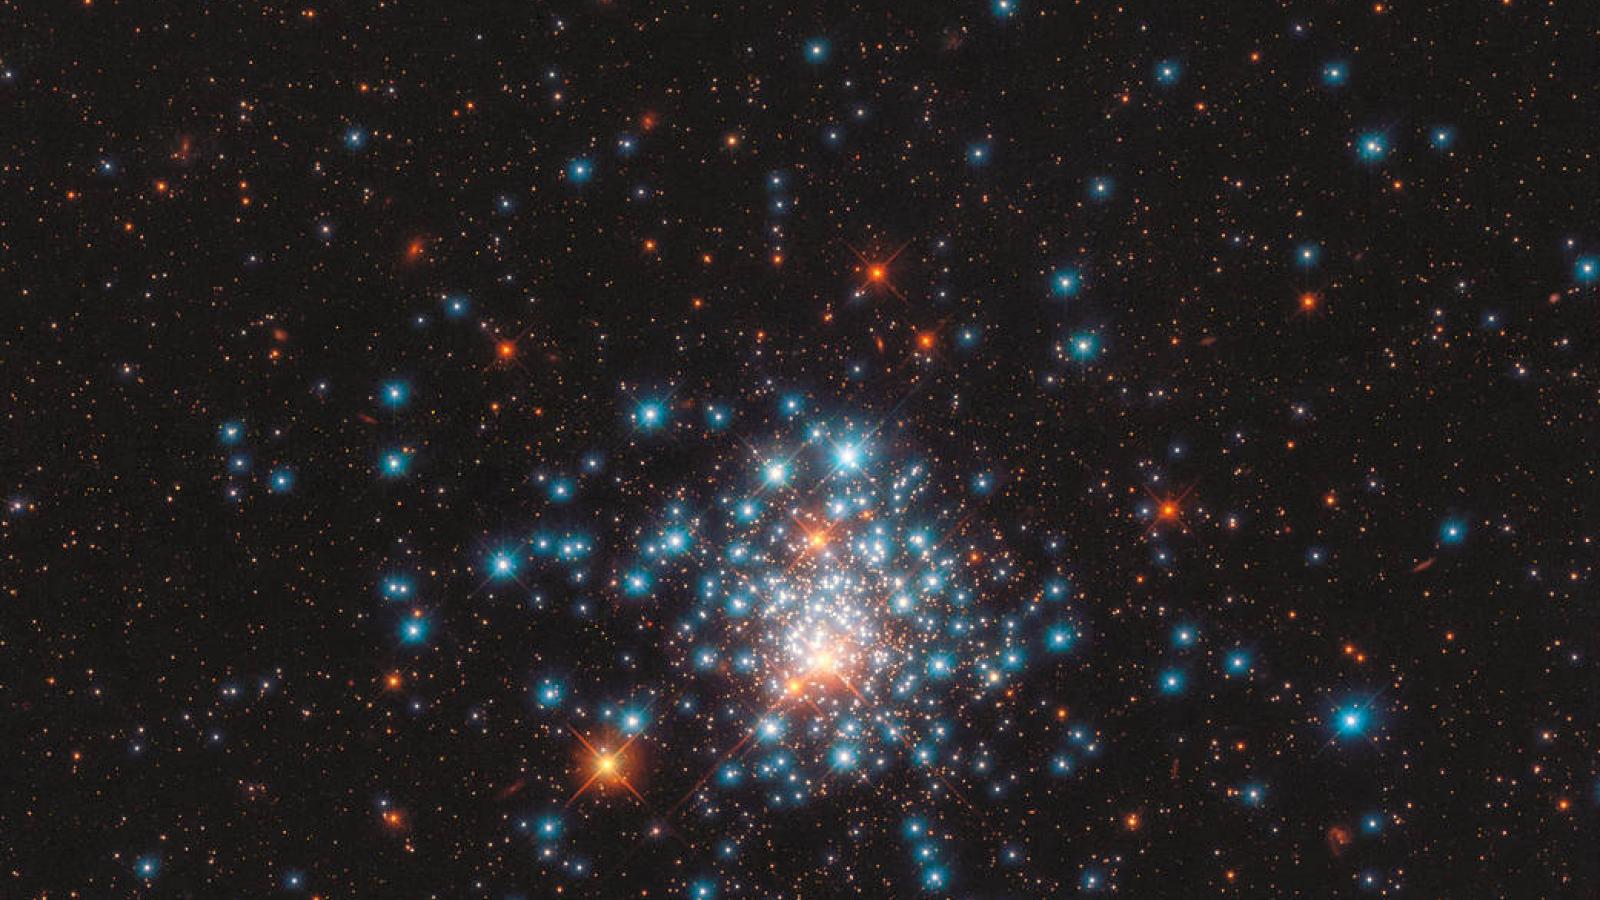 Image of a Star Cluster